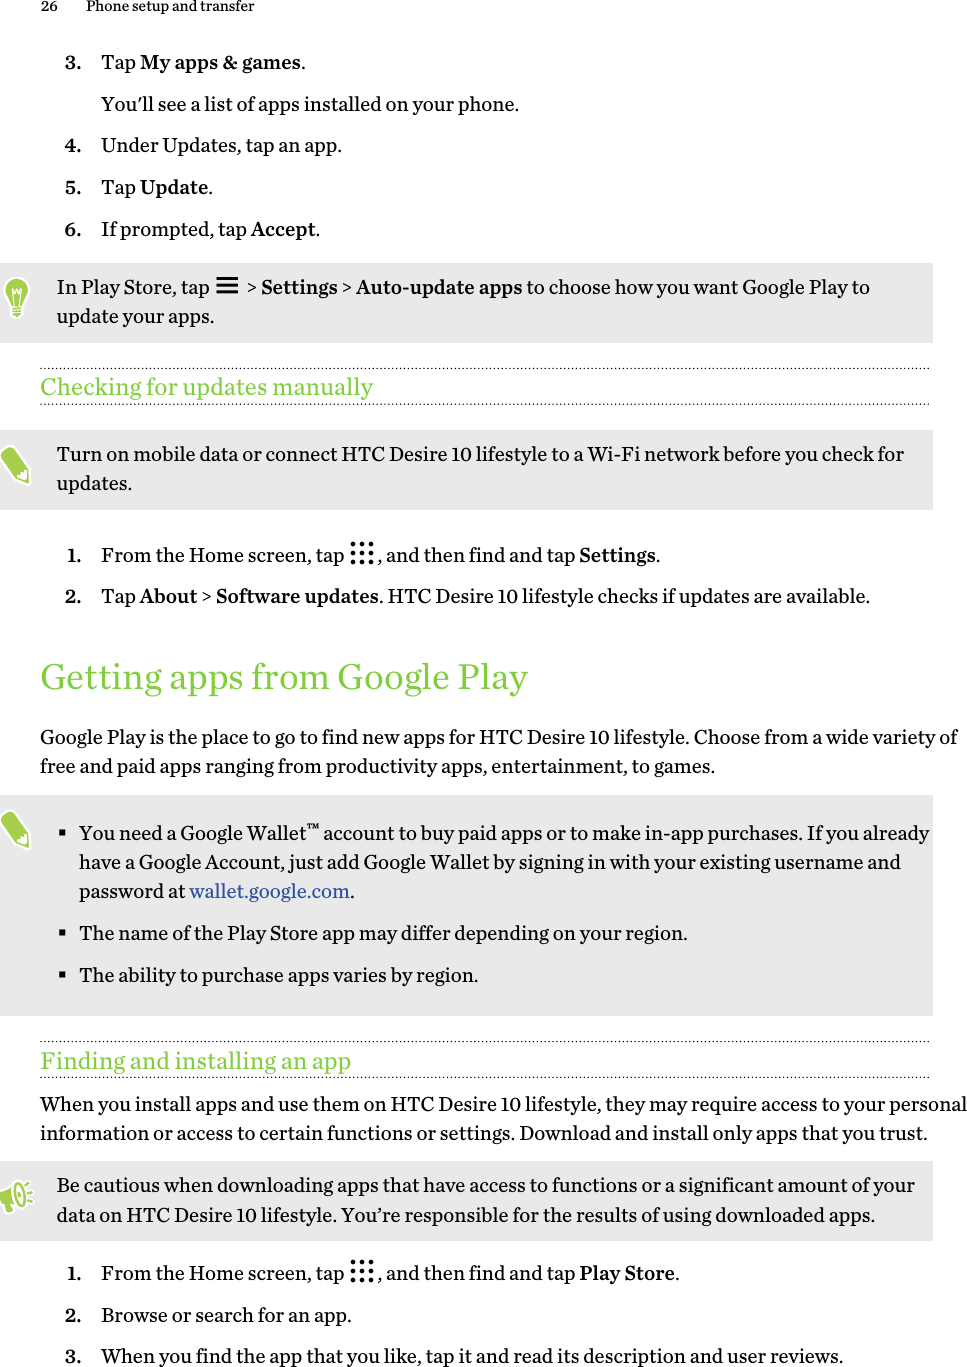 3. Tap My apps &amp; games. You&apos;ll see a list of apps installed on your phone.4. Under Updates, tap an app.5. Tap Update.6. If prompted, tap Accept.In Play Store, tap   &gt; Settings &gt; Auto-update apps to choose how you want Google Play to update your apps.Checking for updates manuallyTurn on mobile data or connect HTC Desire 10 lifestyle to a Wi-Fi network before you check for updates.1. From the Home screen, tap  , and then find and tap Settings.2. Tap About &gt; Software updates. HTC Desire 10 lifestyle checks if updates are available. Getting apps from Google PlayGoogle Play is the place to go to find new apps for HTC Desire 10 lifestyle. Choose from a wide variety of free and paid apps ranging from productivity apps, entertainment, to games.§You need a Google Wallet™ account to buy paid apps or to make in-app purchases. If you already have a Google Account, just add Google Wallet by signing in with your existing username and password at wallet.google.com.§The name of the Play Store app may differ depending on your region.§The ability to purchase apps varies by region.Finding and installing an appWhen you install apps and use them on HTC Desire 10 lifestyle, they may require access to your personal information or access to certain functions or settings. Download and install only apps that you trust.Be cautious when downloading apps that have access to functions or a significant amount of your data on HTC Desire 10 lifestyle. You’re responsible for the results of using downloaded apps.1. From the Home screen, tap  , and then find and tap Play Store.2. Browse or search for an app.3. When you find the app that you like, tap it and read its description and user reviews.26 Phone setup and transfer